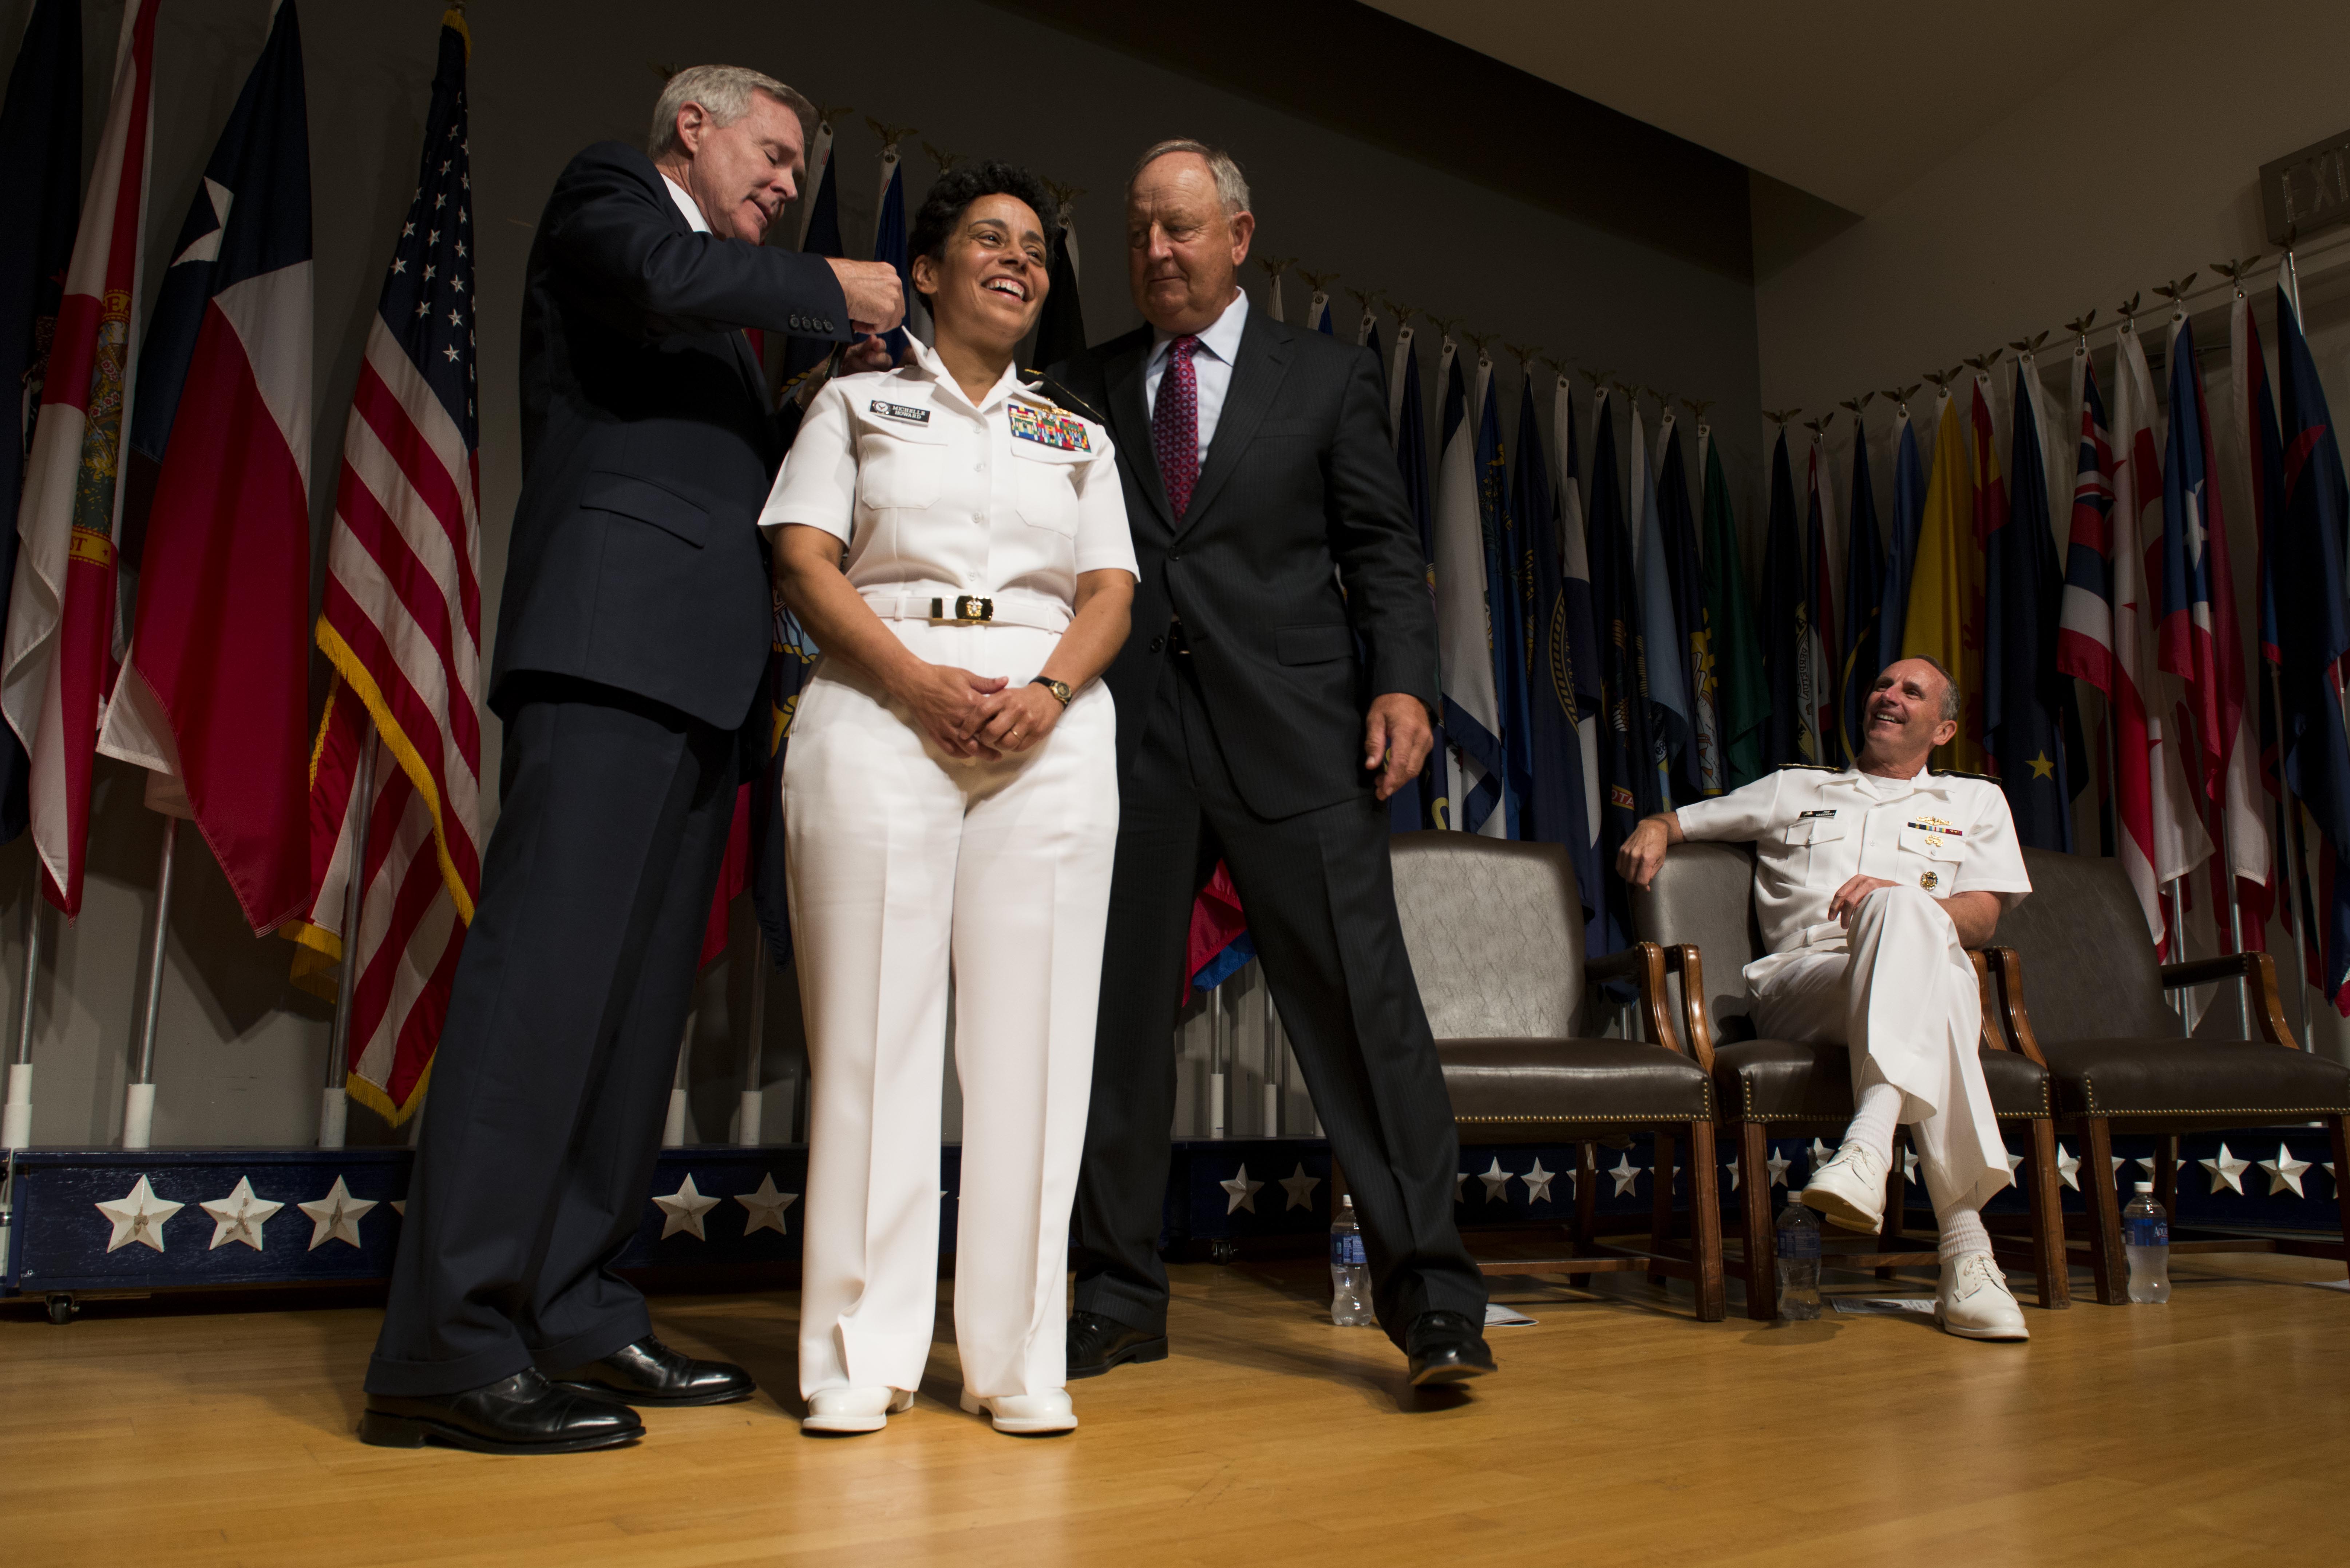 Secretary of the Navy (SECNAV) Ray Mabus, left, promotes Vice Adm. Michelle Howard to the rank of Admiral at the Women In Military Service For America Memorial in Arlington, Va. US Navy Photo